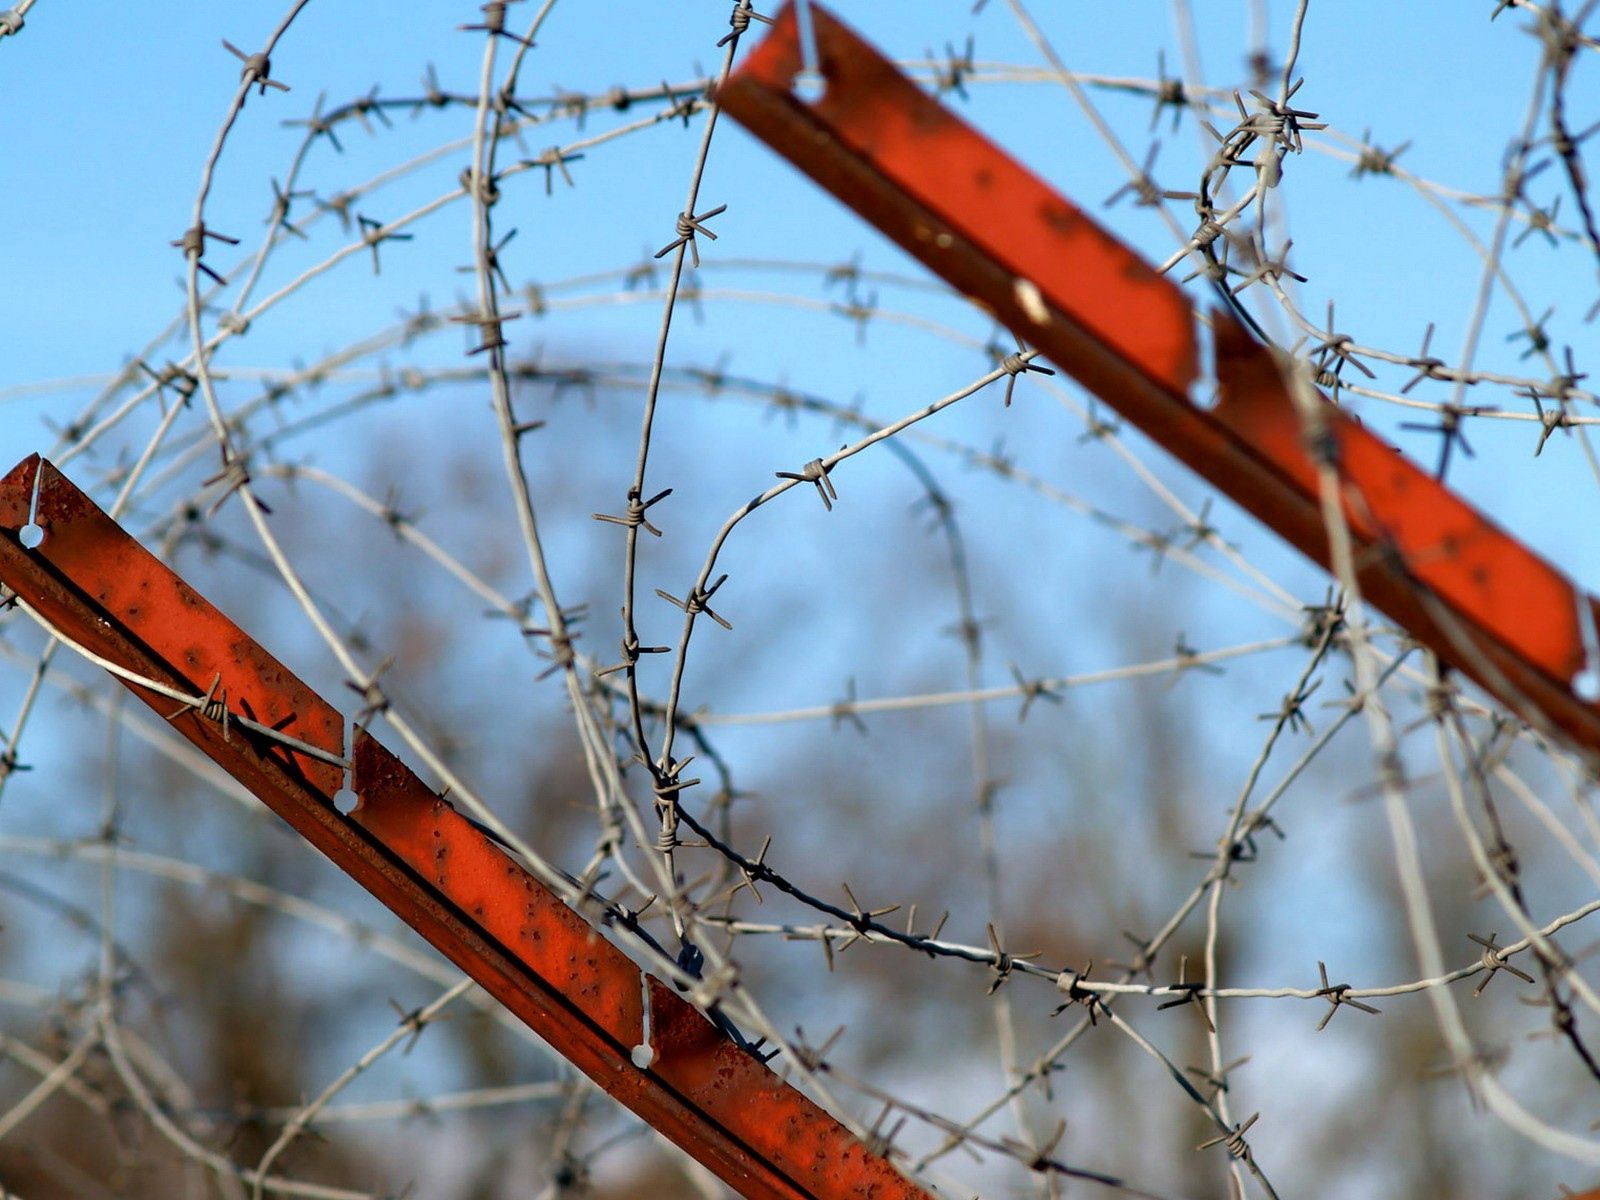 Free HD miscellanea, sky, miscellaneous, paint, metal, rust, barbed wire, stretched, tense